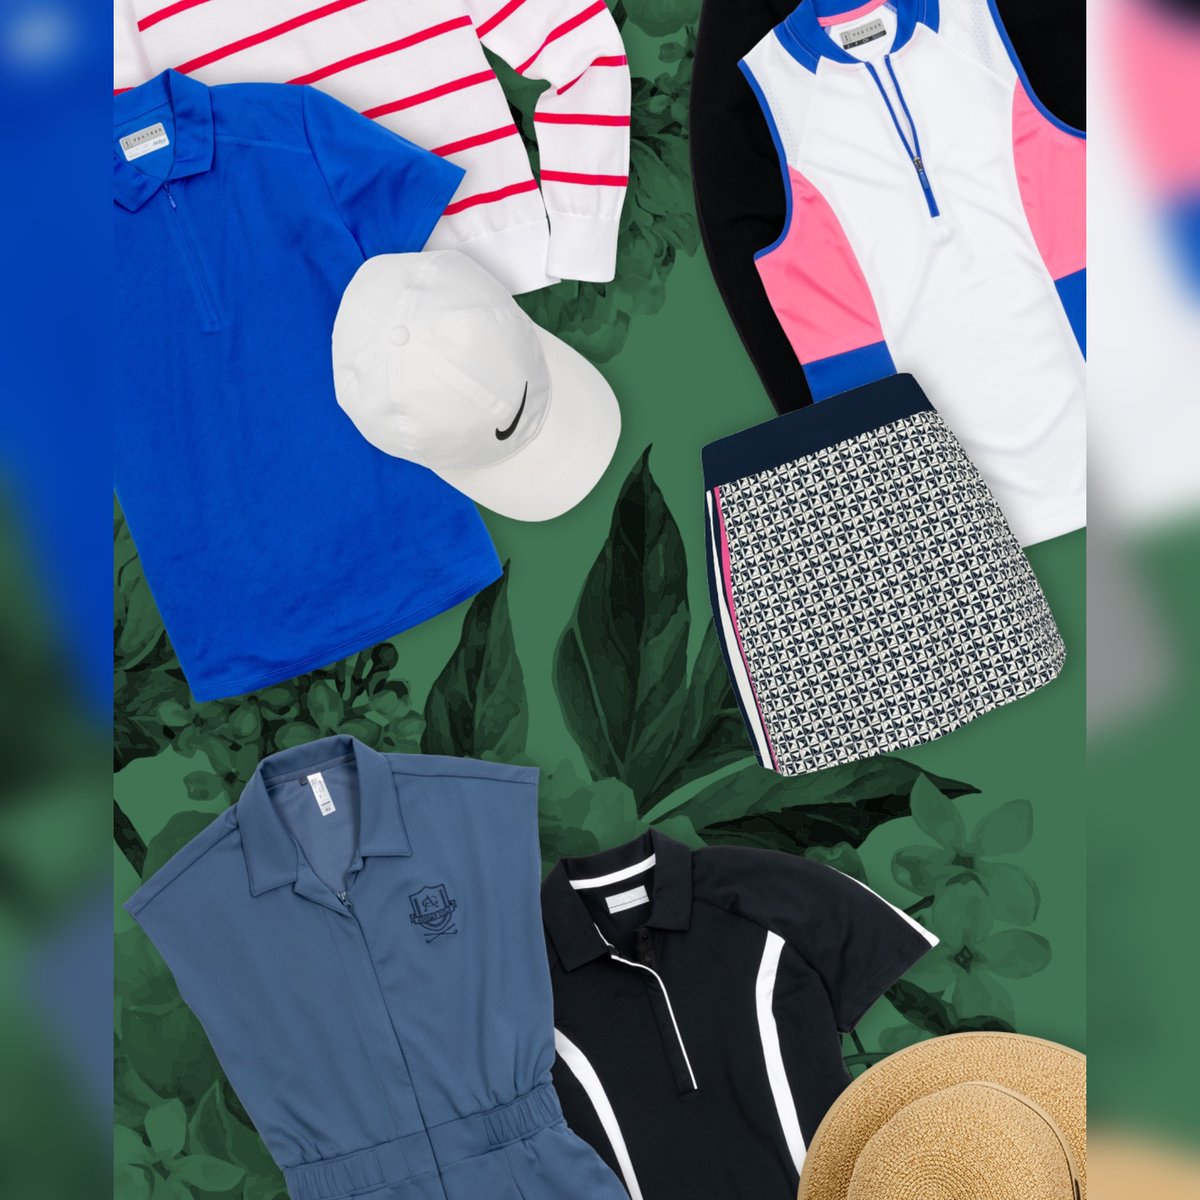 Find Mom a new outfit for golf season with these top apparel trends for this Mother's Day! 🎁💐 Shop Mother's Day Gift Guide: bit.ly/3JSrlk6 Read More: bit.ly/3WwjiRv